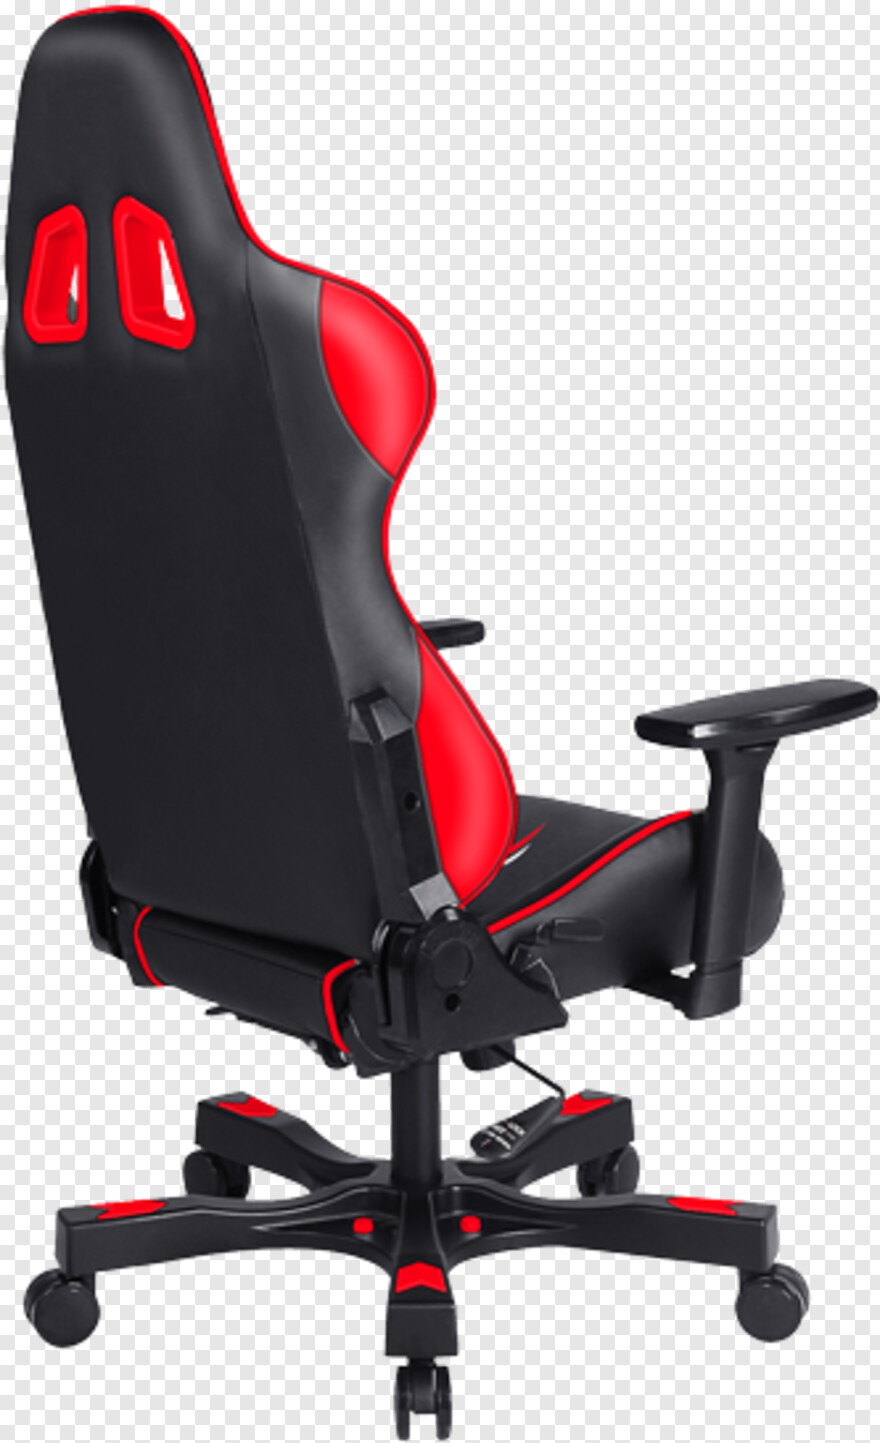  Gaming, Folding Chair, Gaming Characters, Person Sitting In Chair, Cinch Gaming, Chair